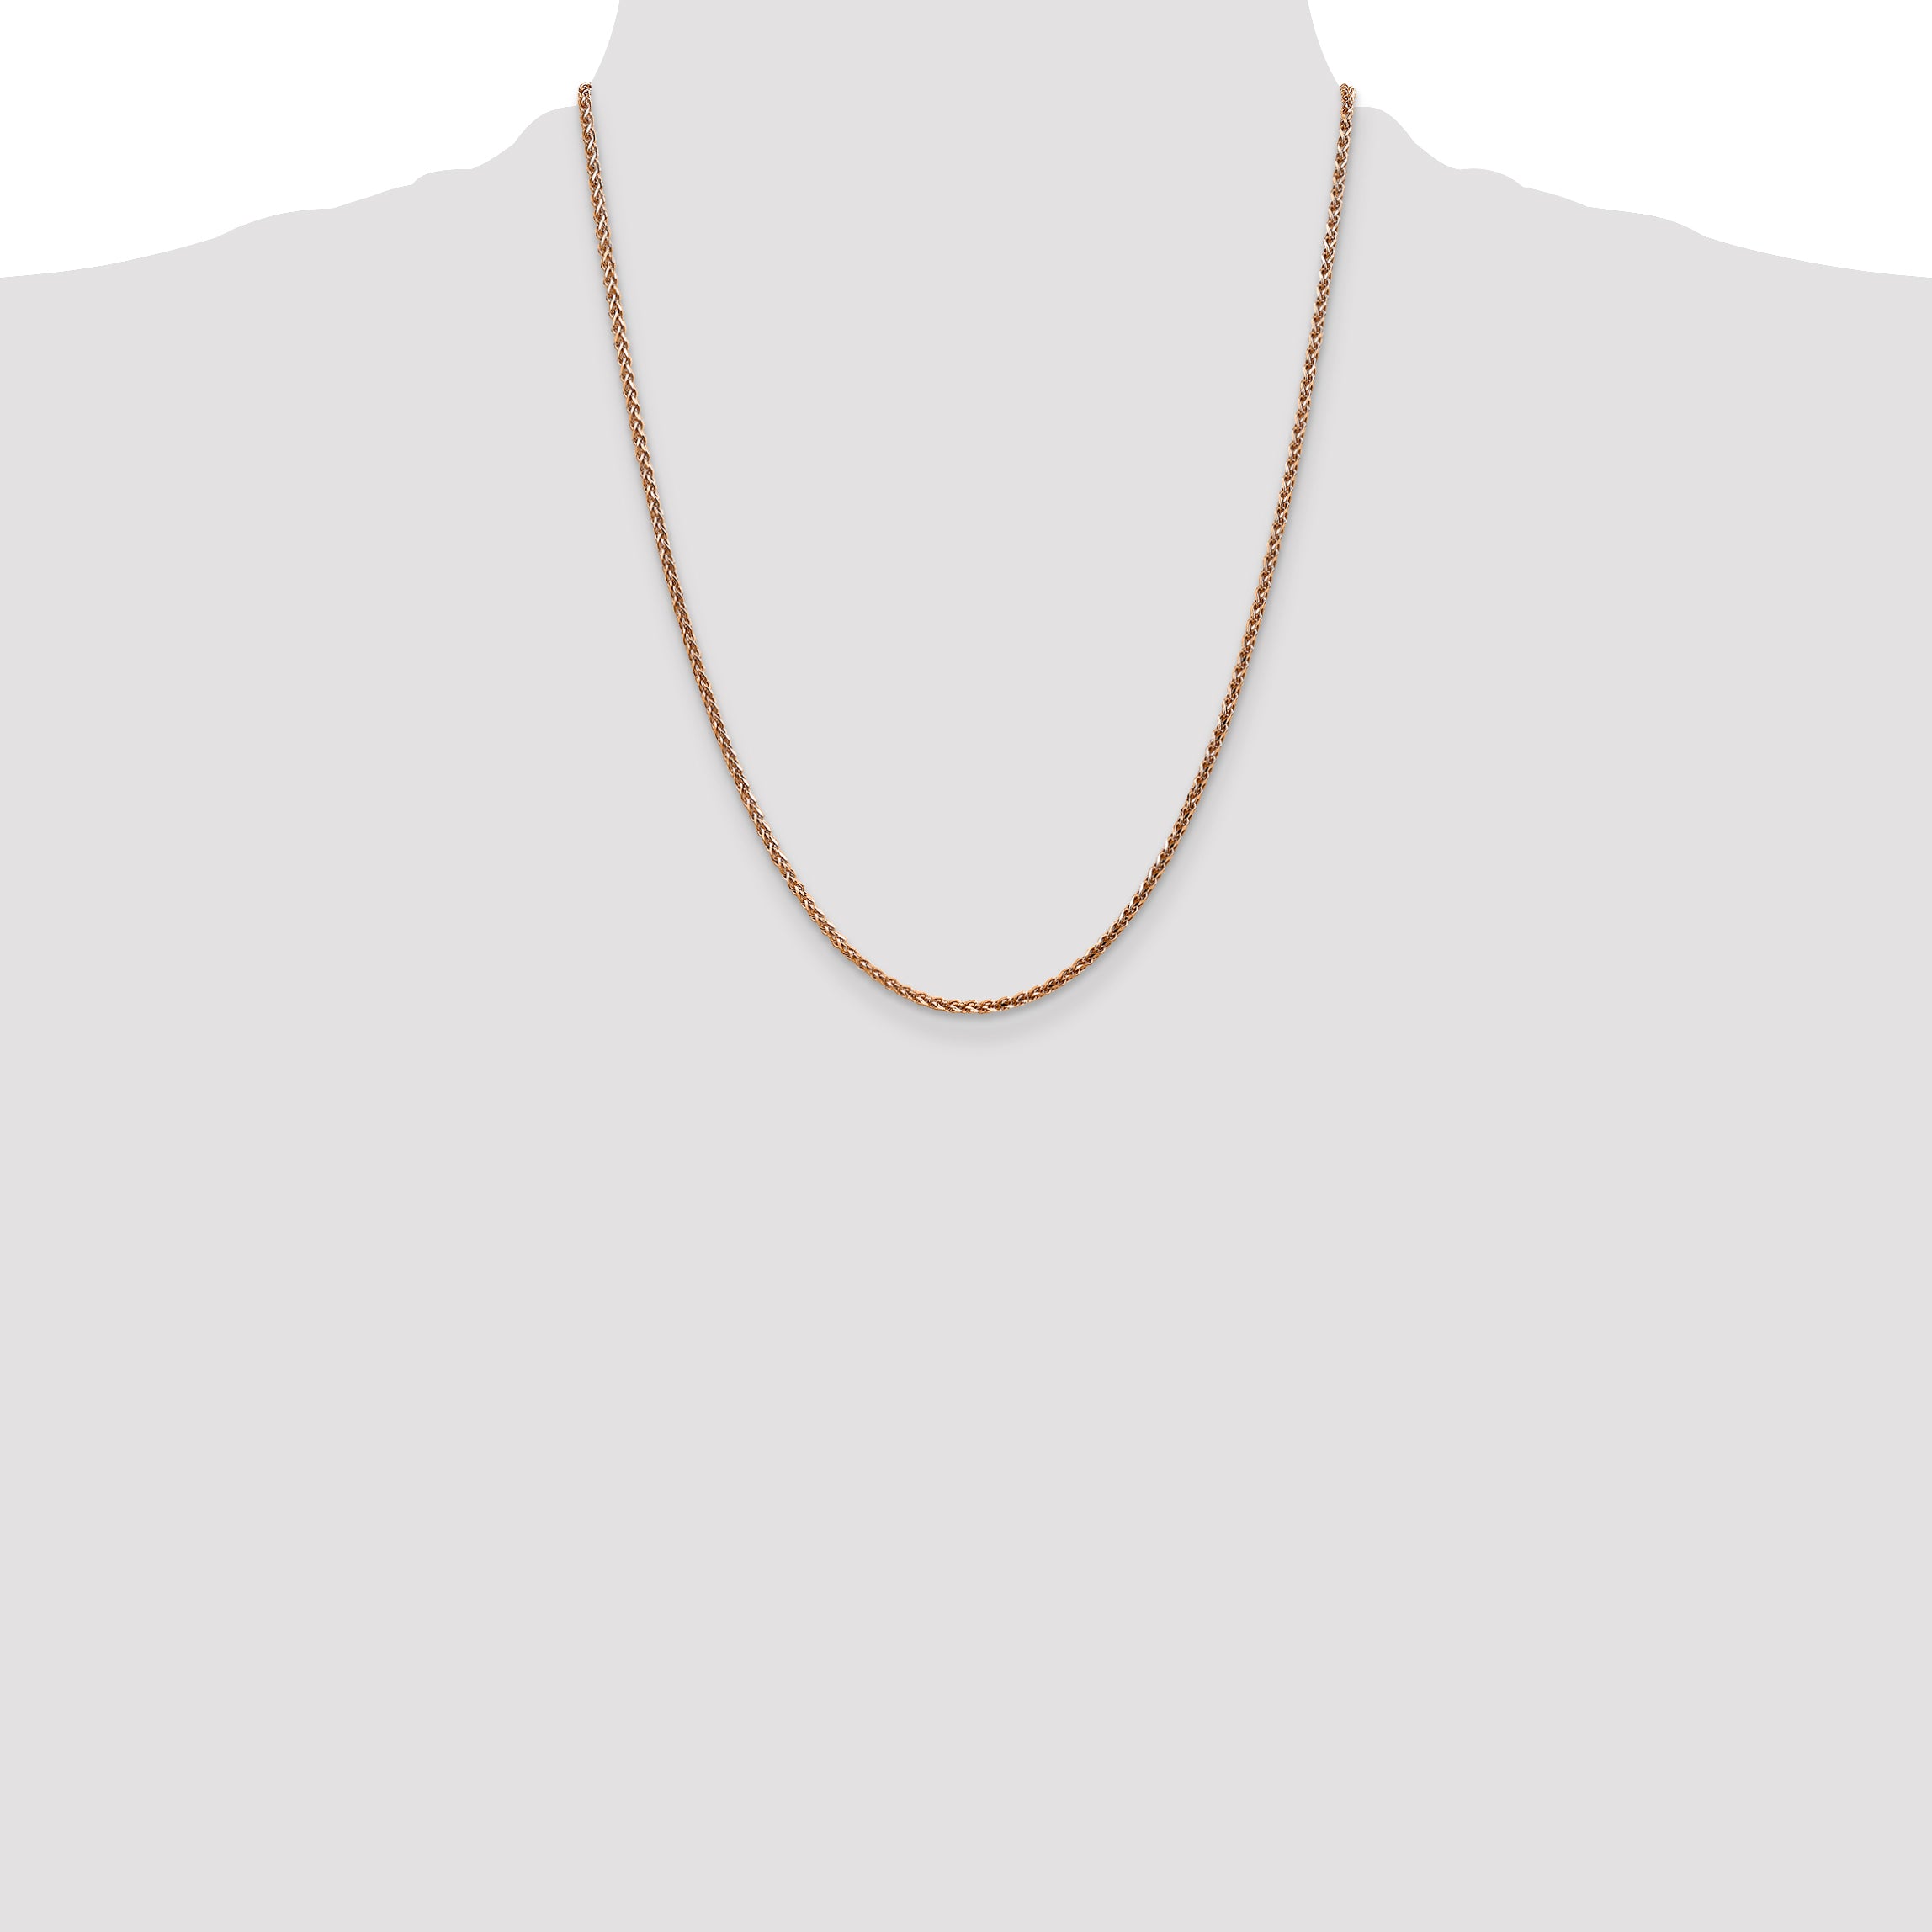 14K Rose Gold 16 inch 2.1mm Diamond-cut Spiga with Lobster Clasp Chain